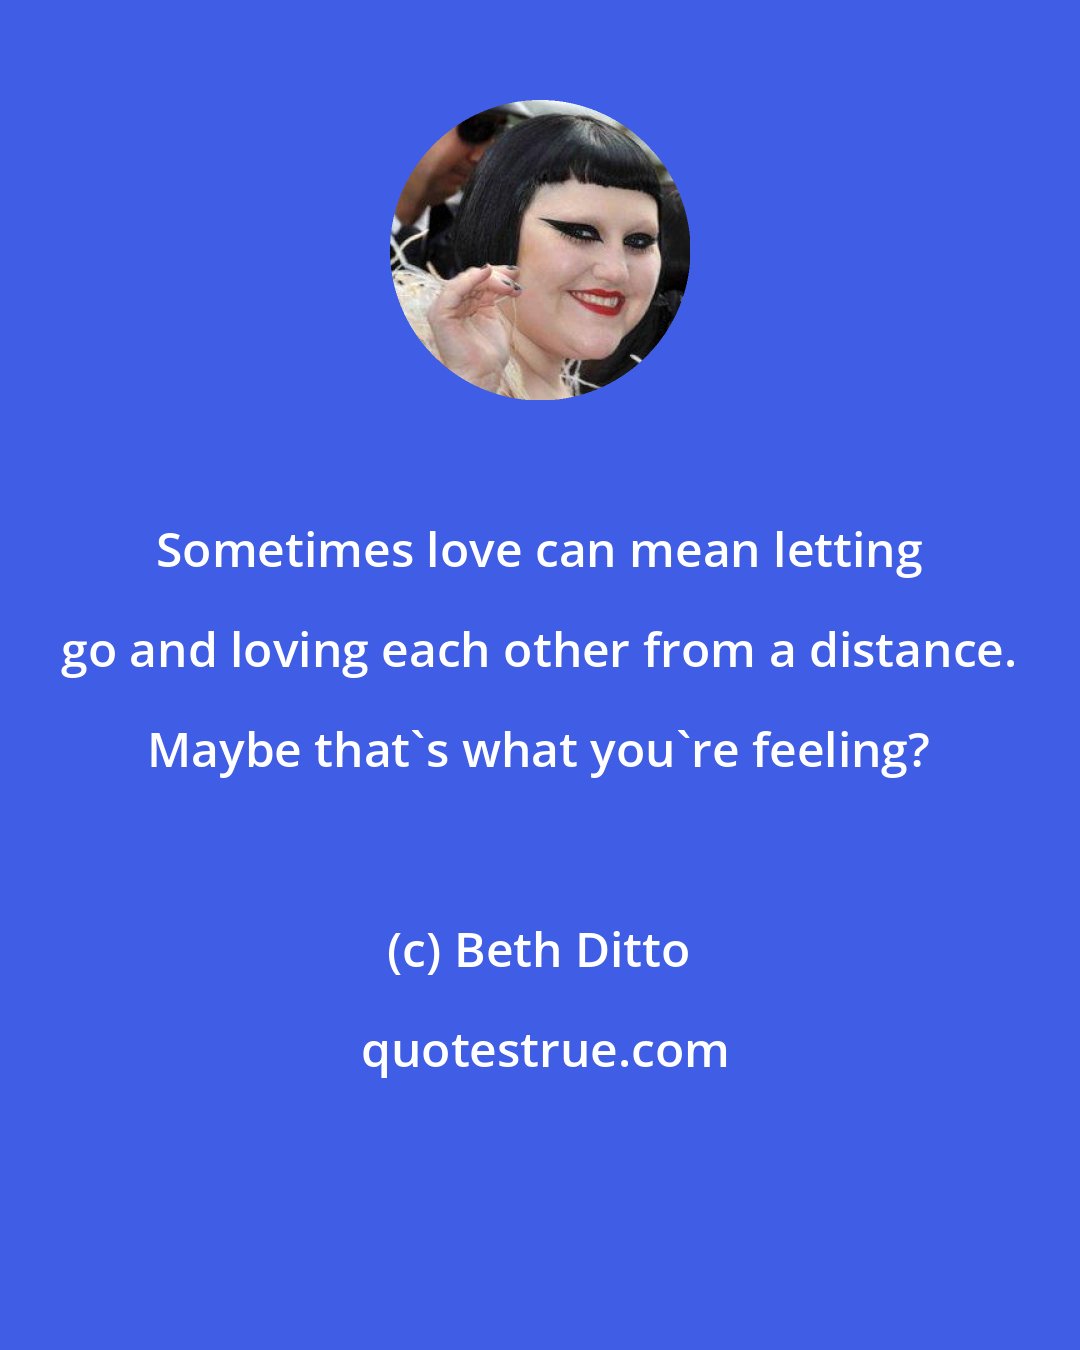 Beth Ditto: Sometimes love can mean letting go and loving each other from a distance. Maybe that's what you're feeling?